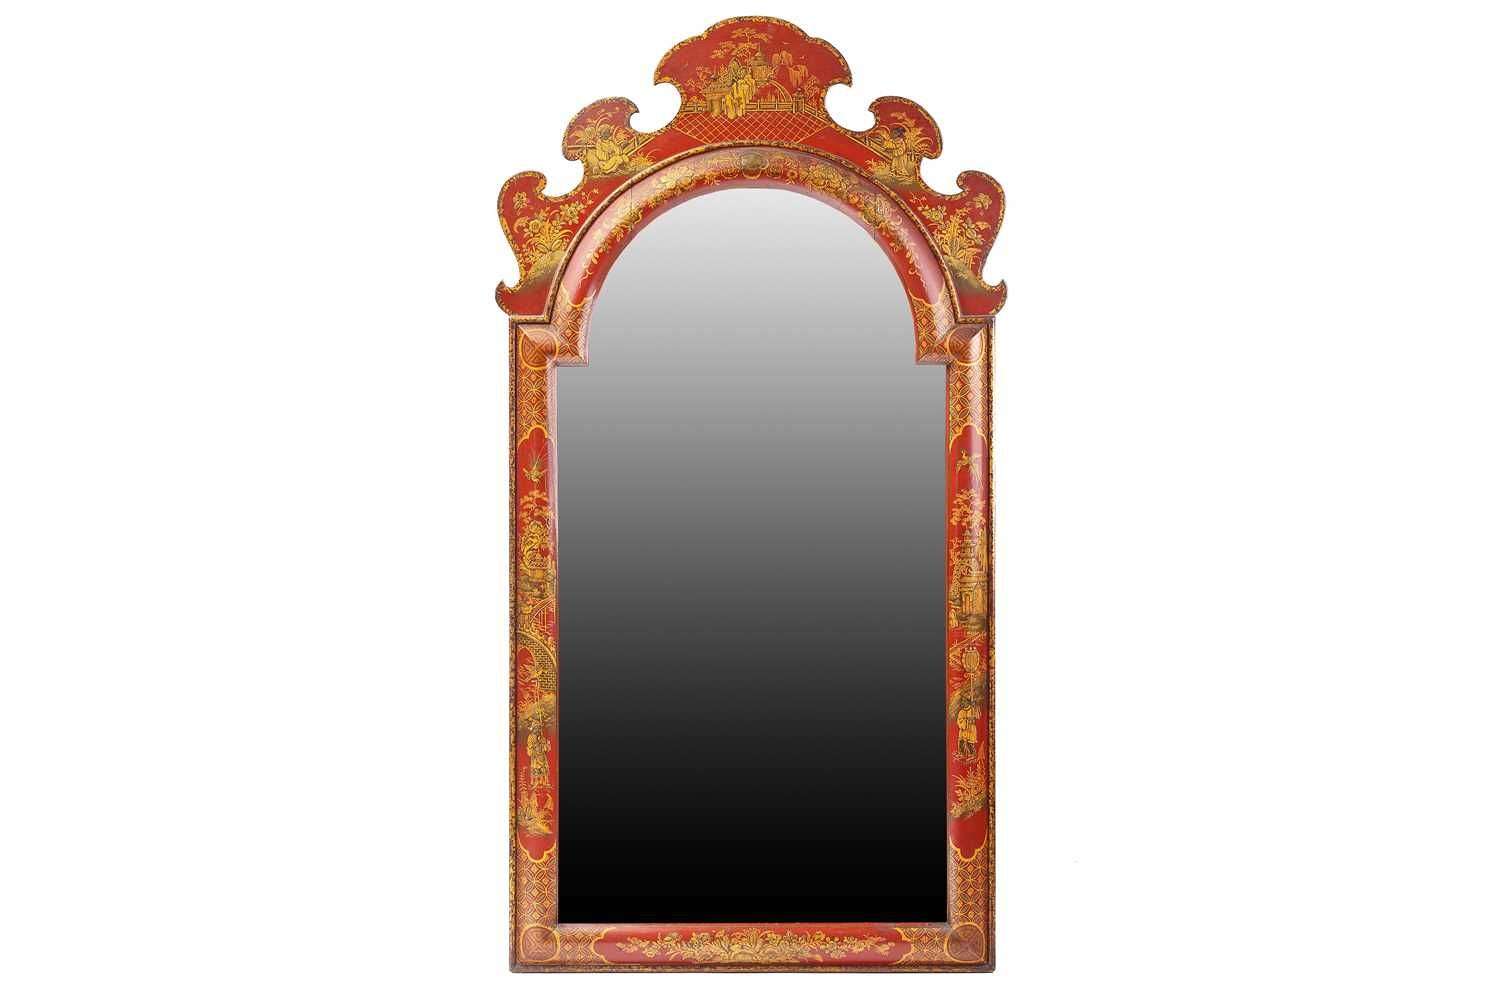 19th century red lacquer Chinoiserie pier mirror.